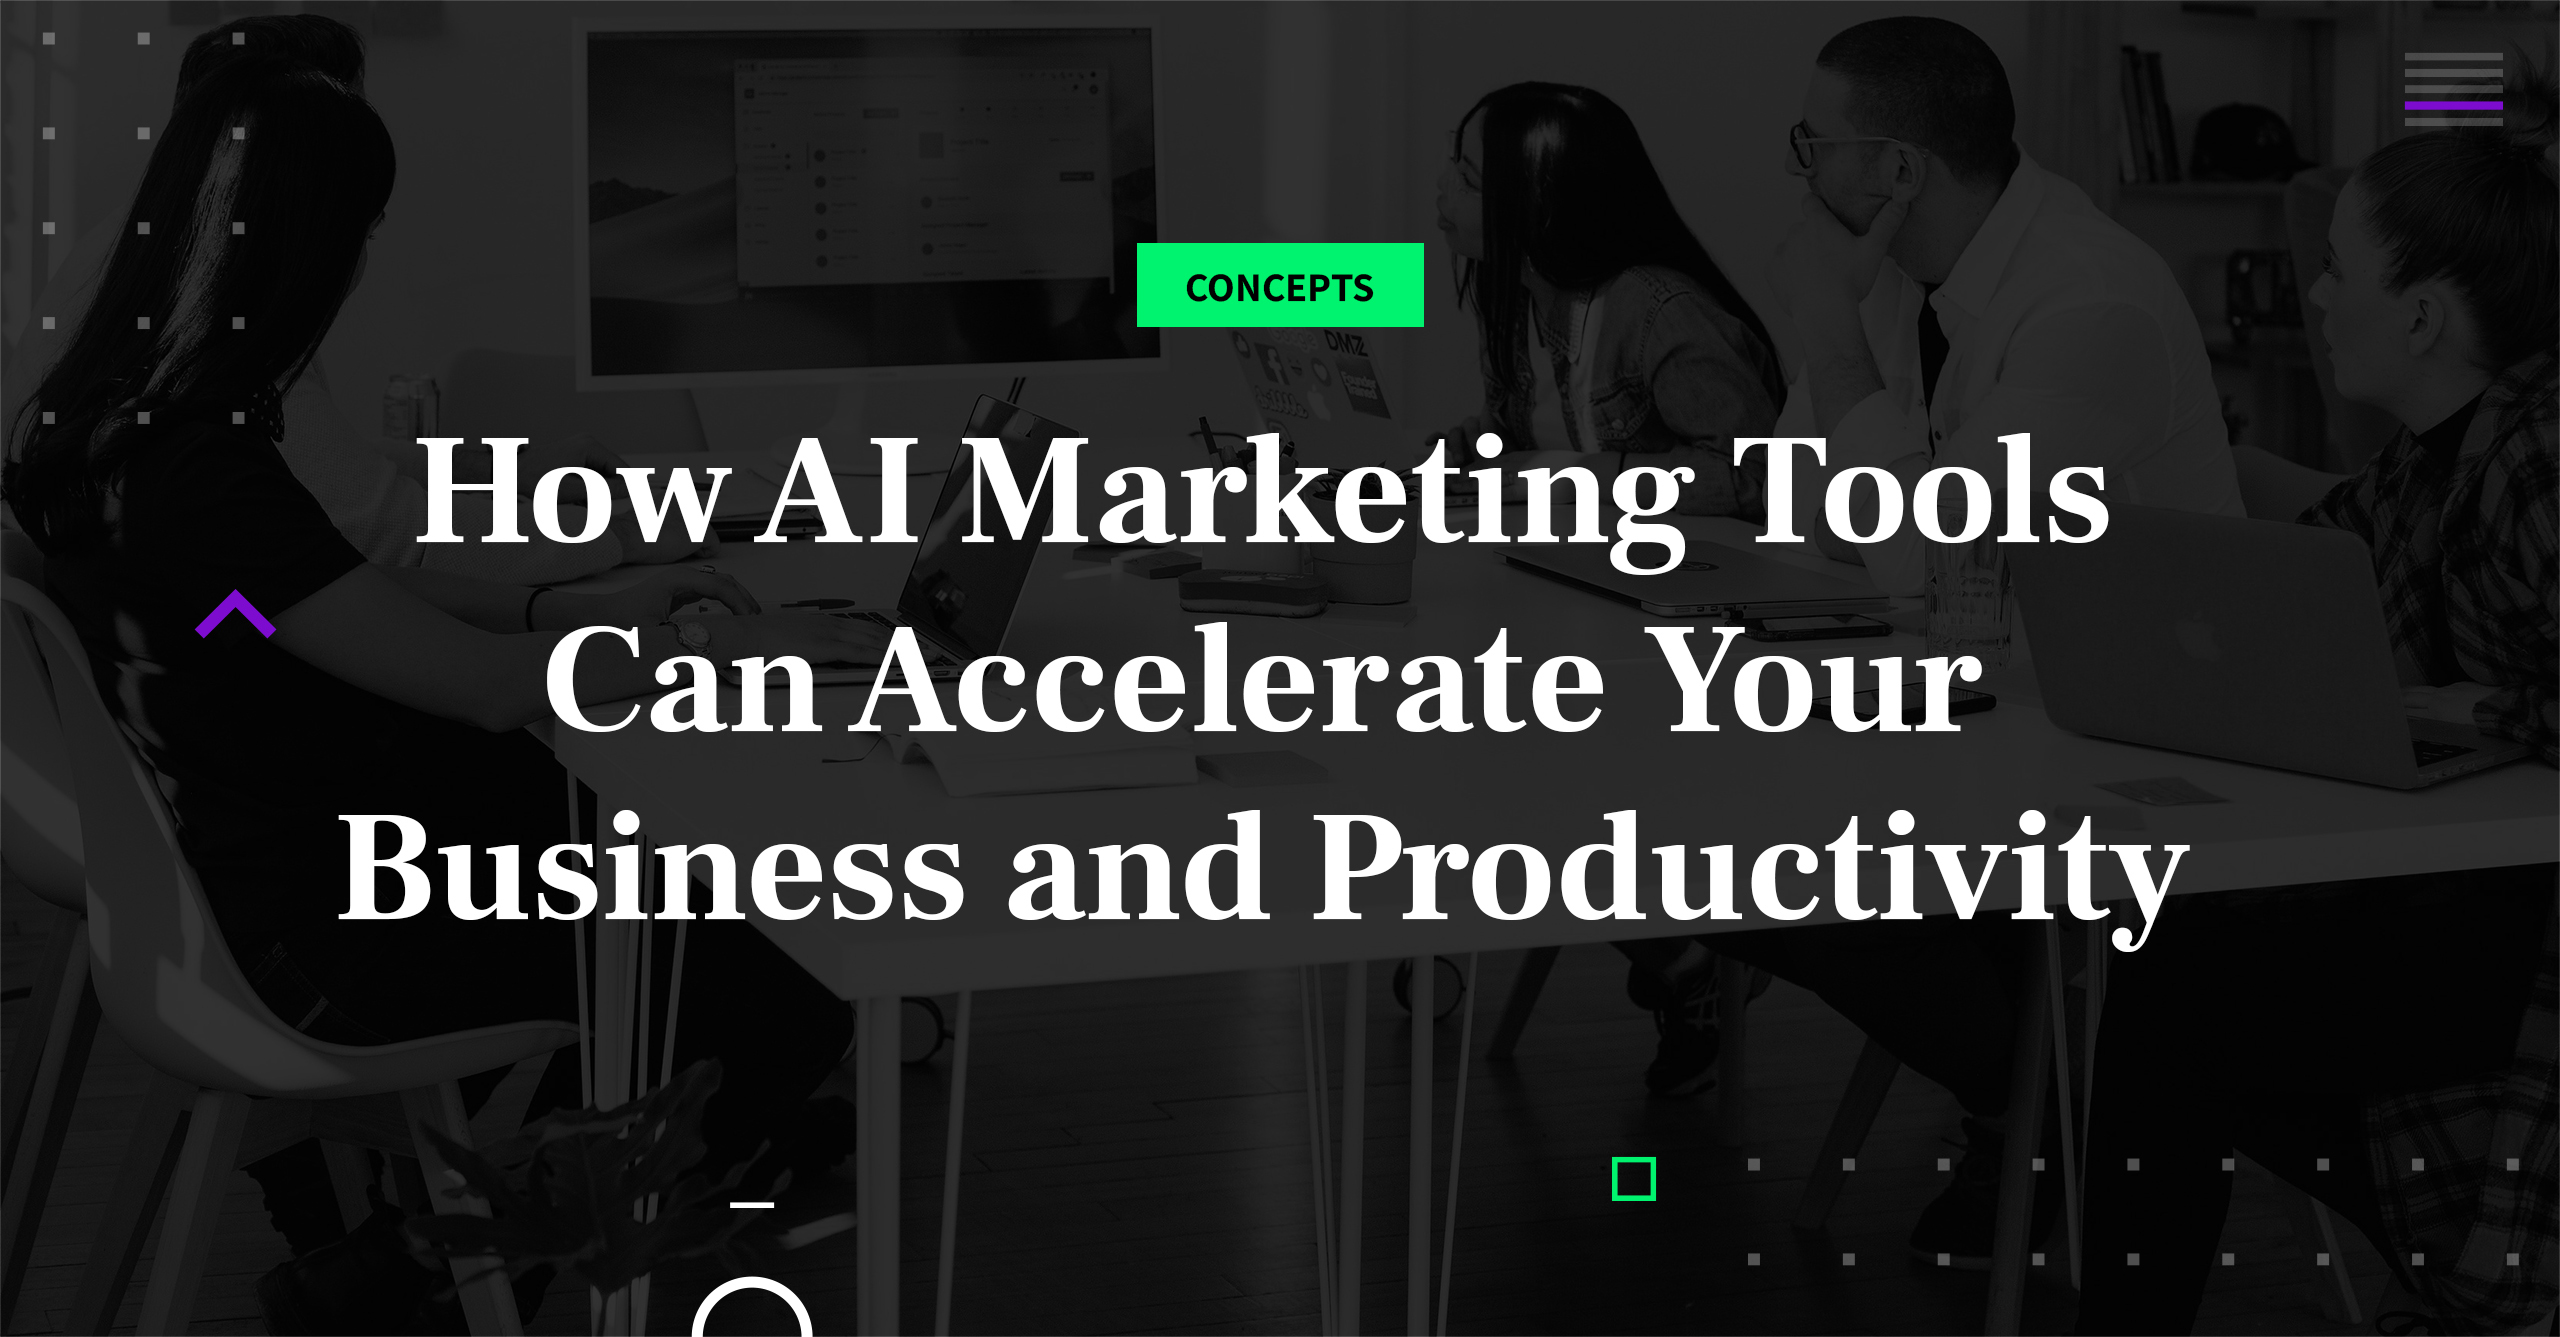 AI Marketing Tools can accelerate your productivity